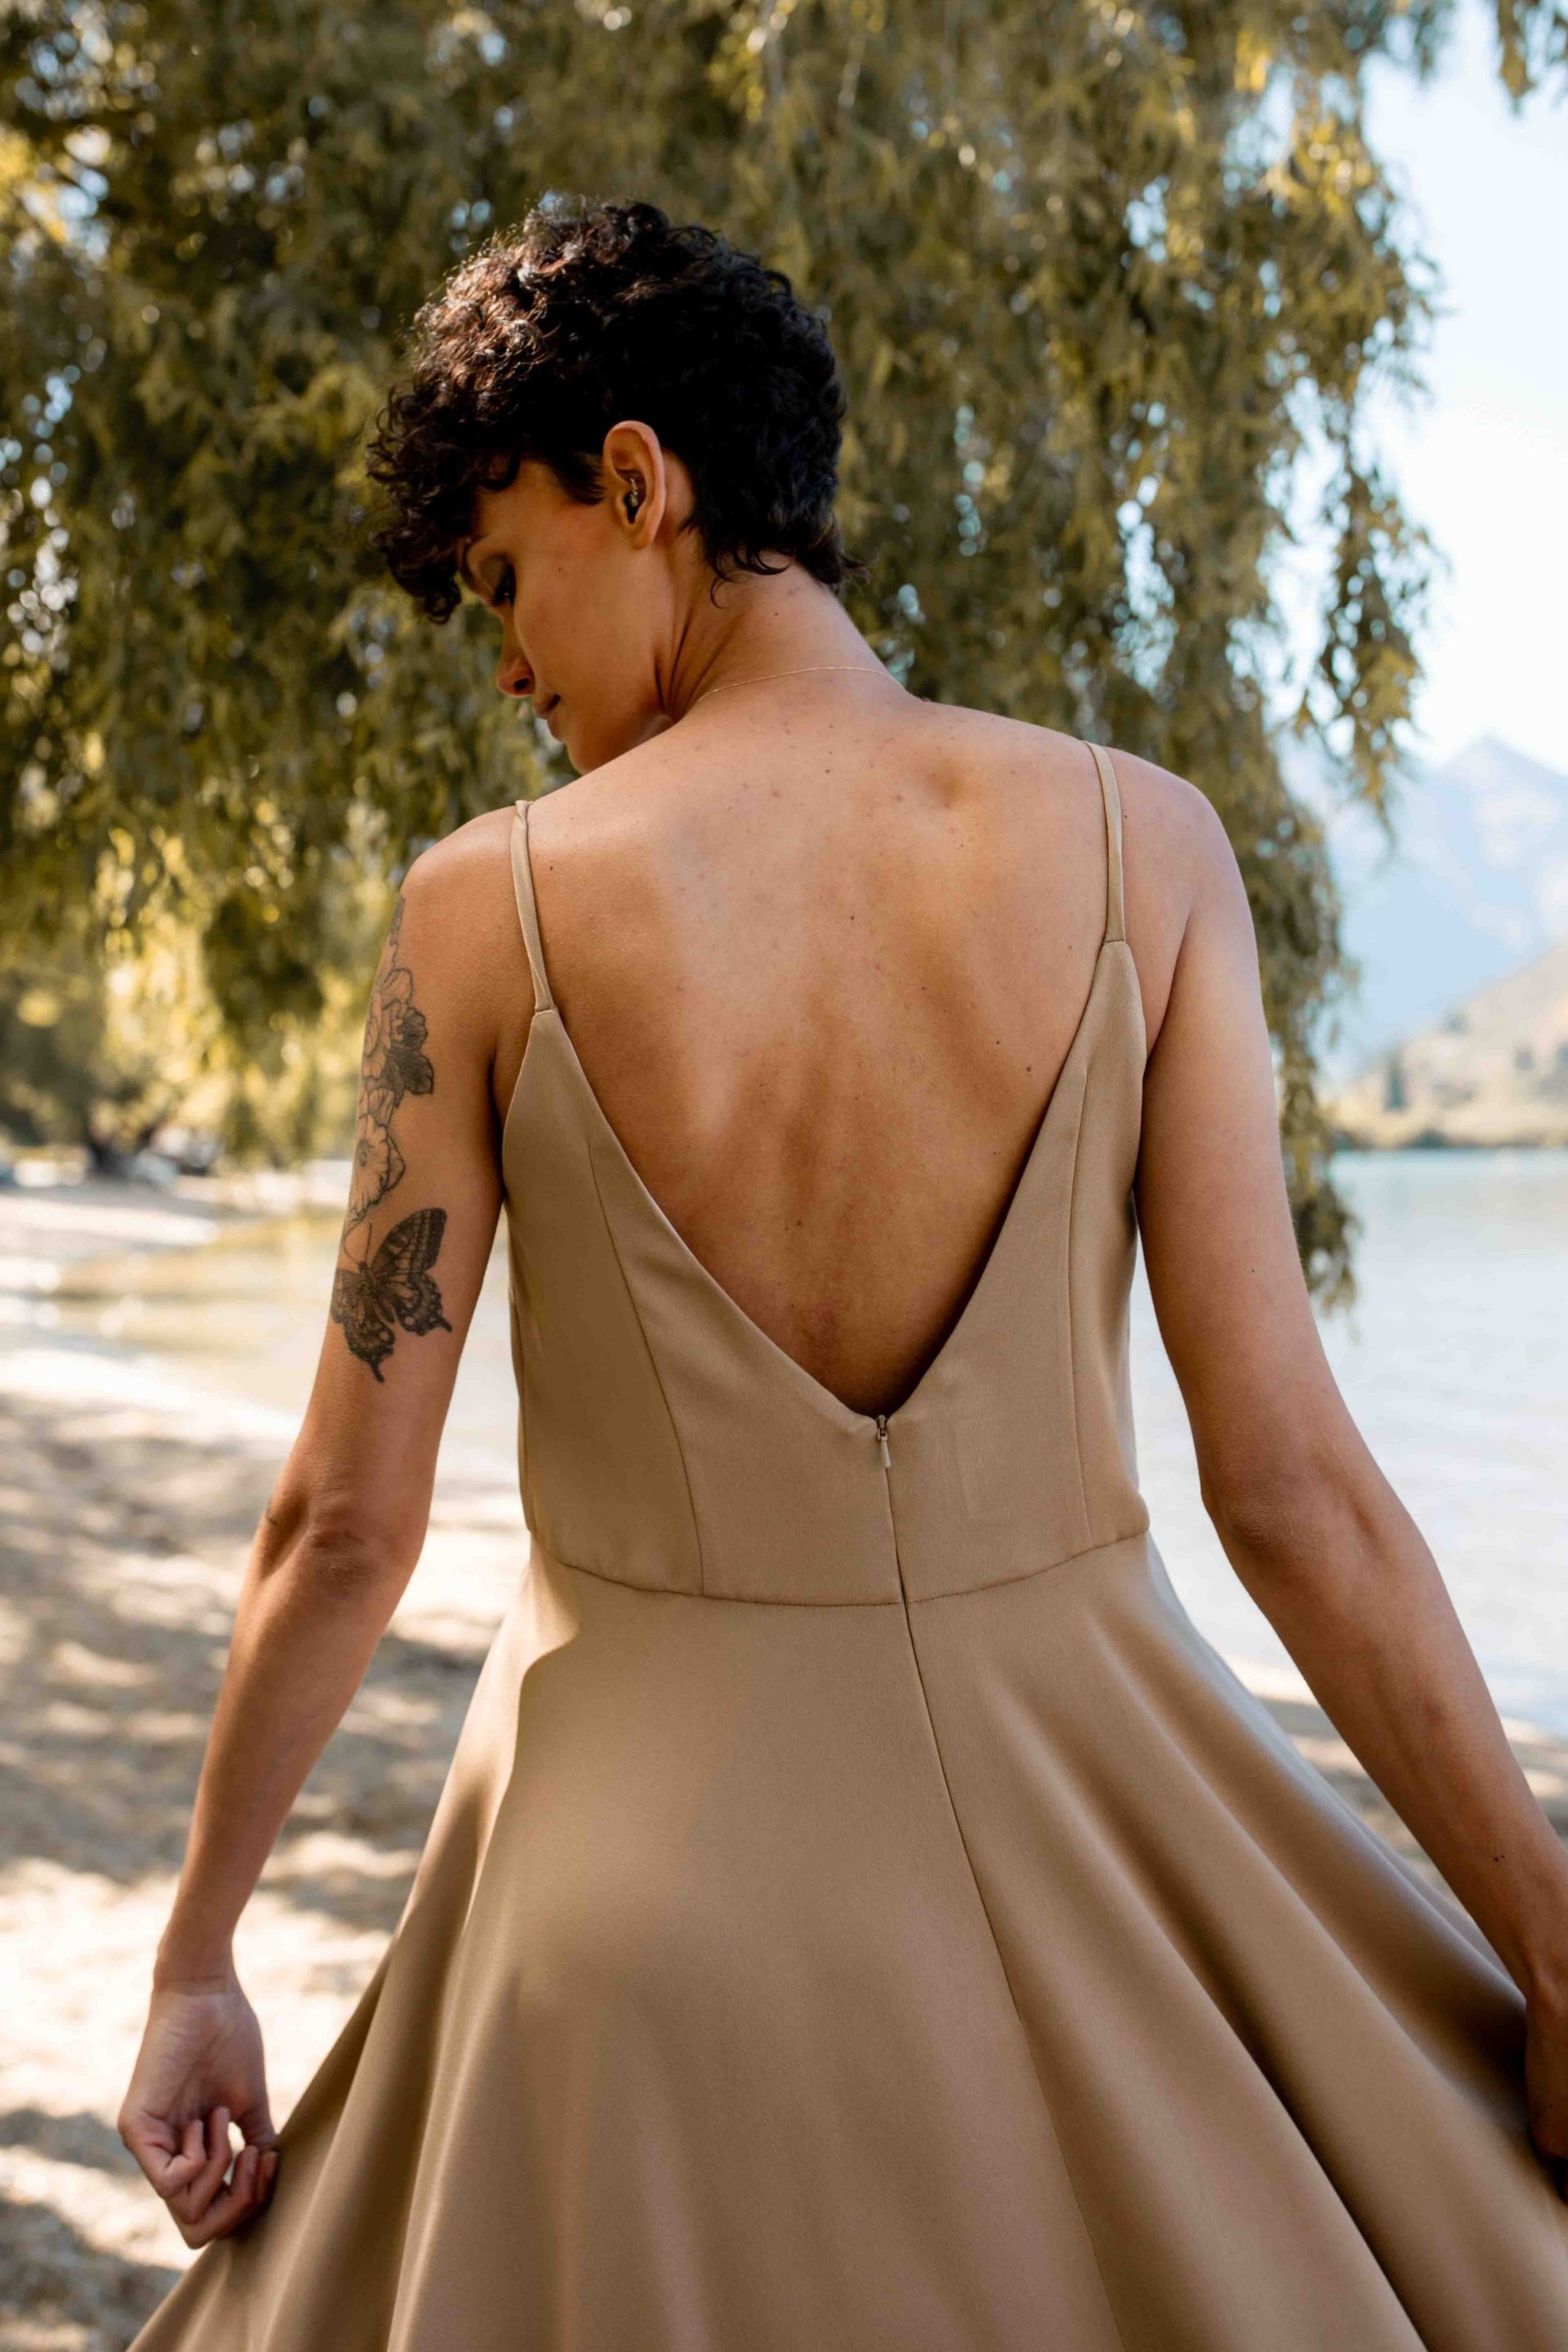 Xena+Dress+in+Armani+Nude+-+Nemo+Bridal+Couture+Queenstown+New+Zealand+0V9A2580.jpg